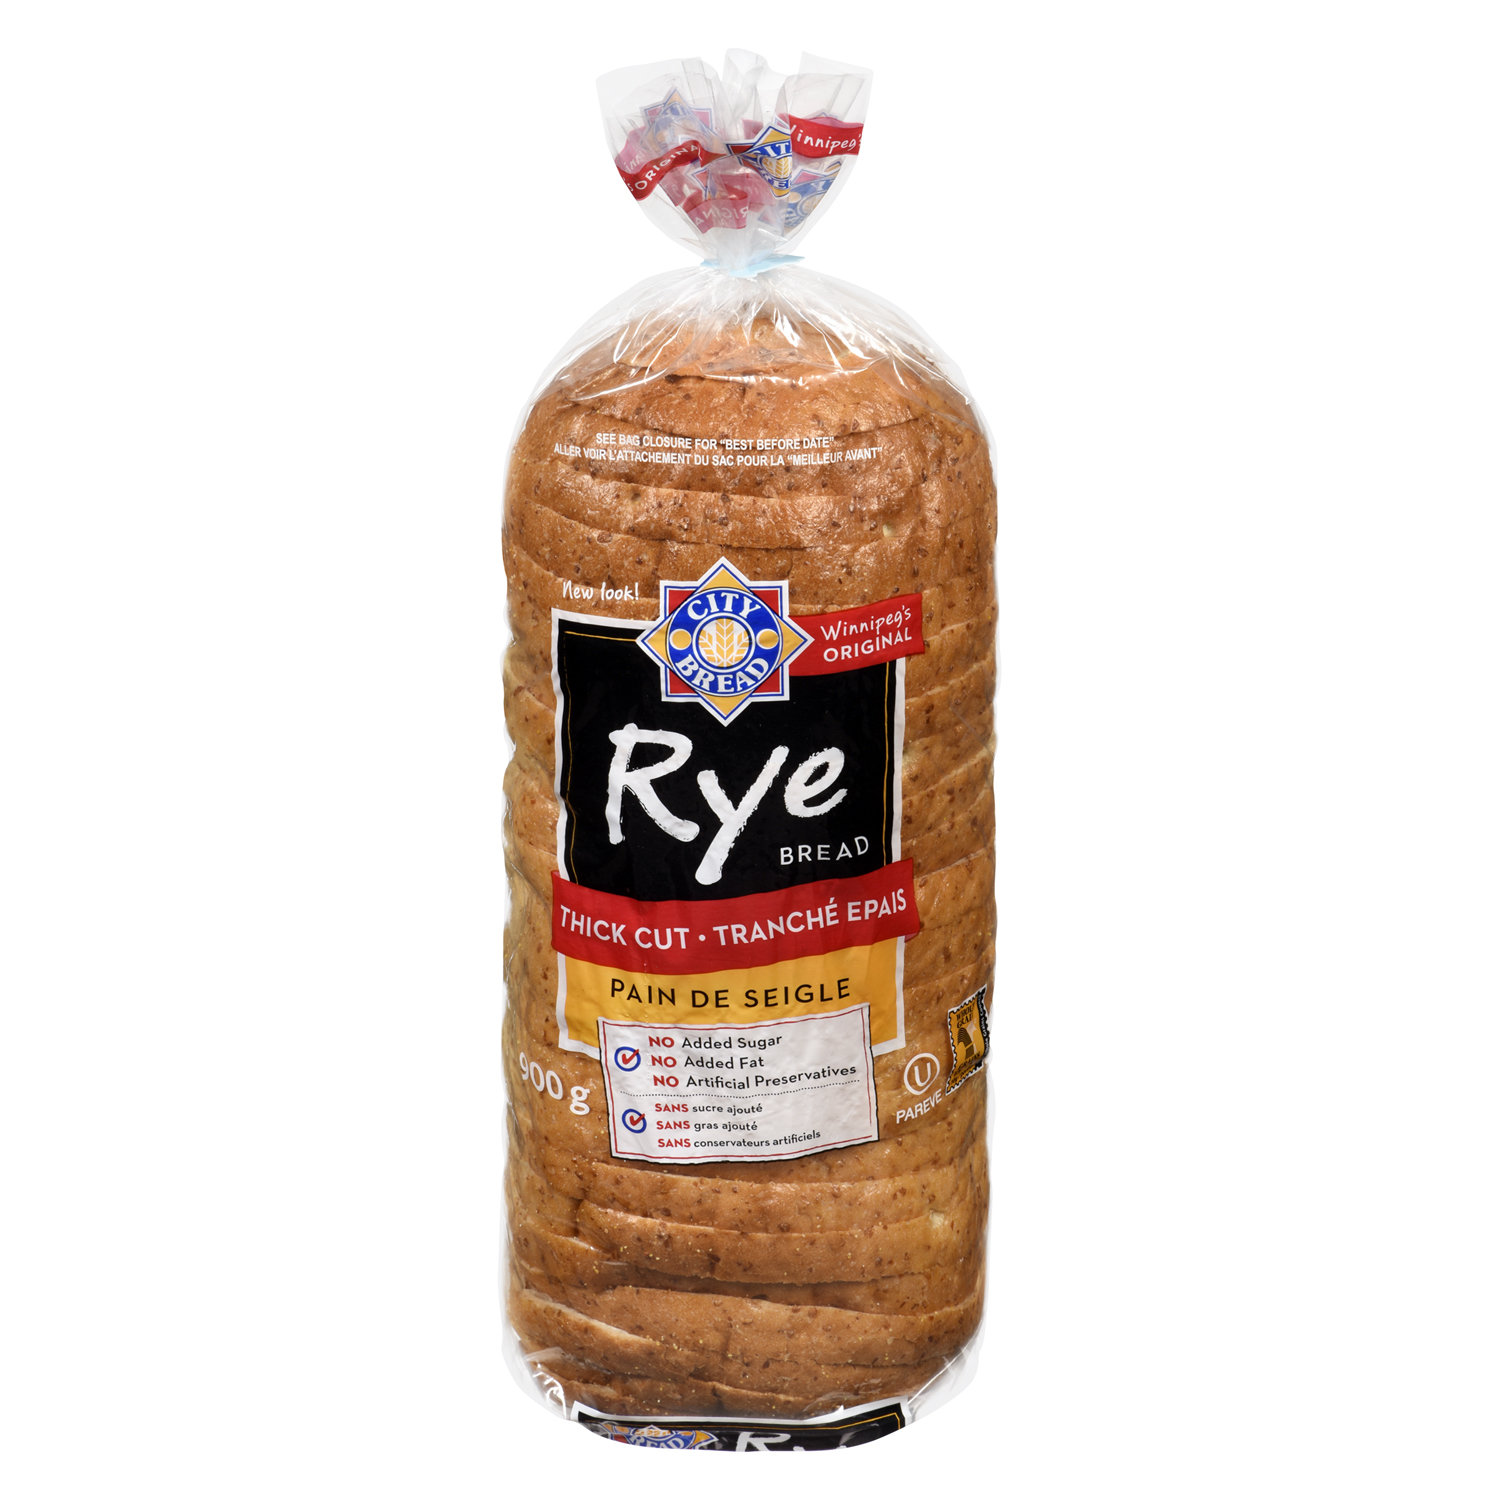 is rye flour good for dogs